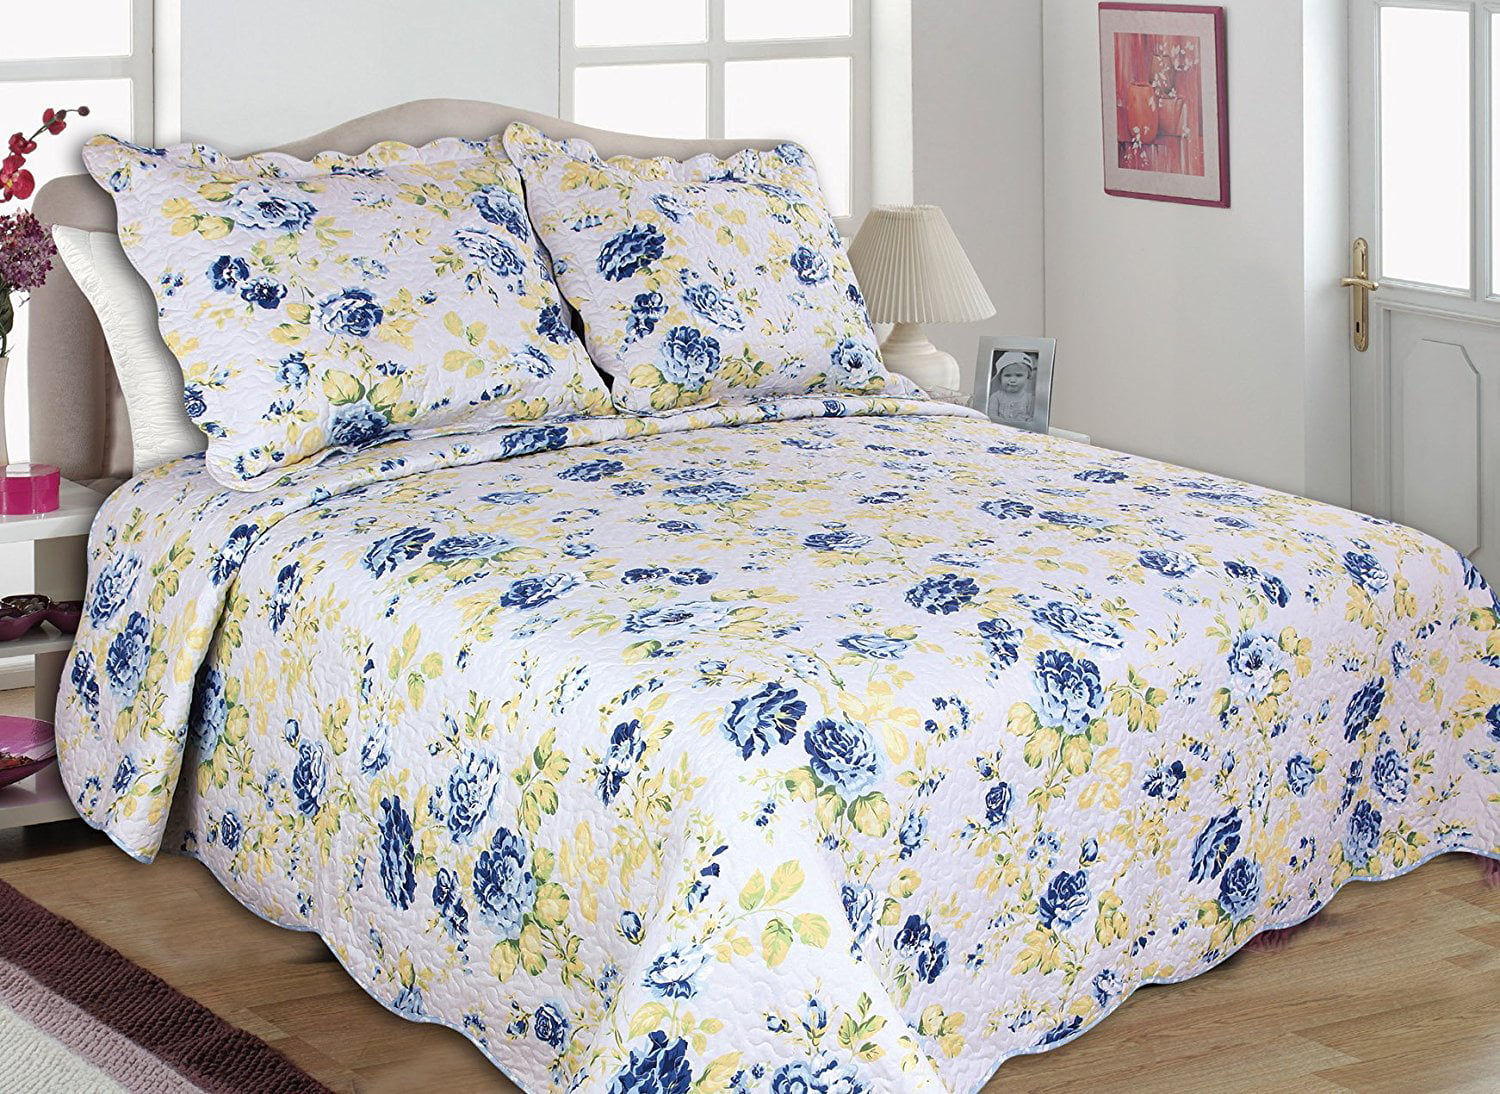 86 bedspread and coverlet with Floral Prints All For You 3PC quilt set 